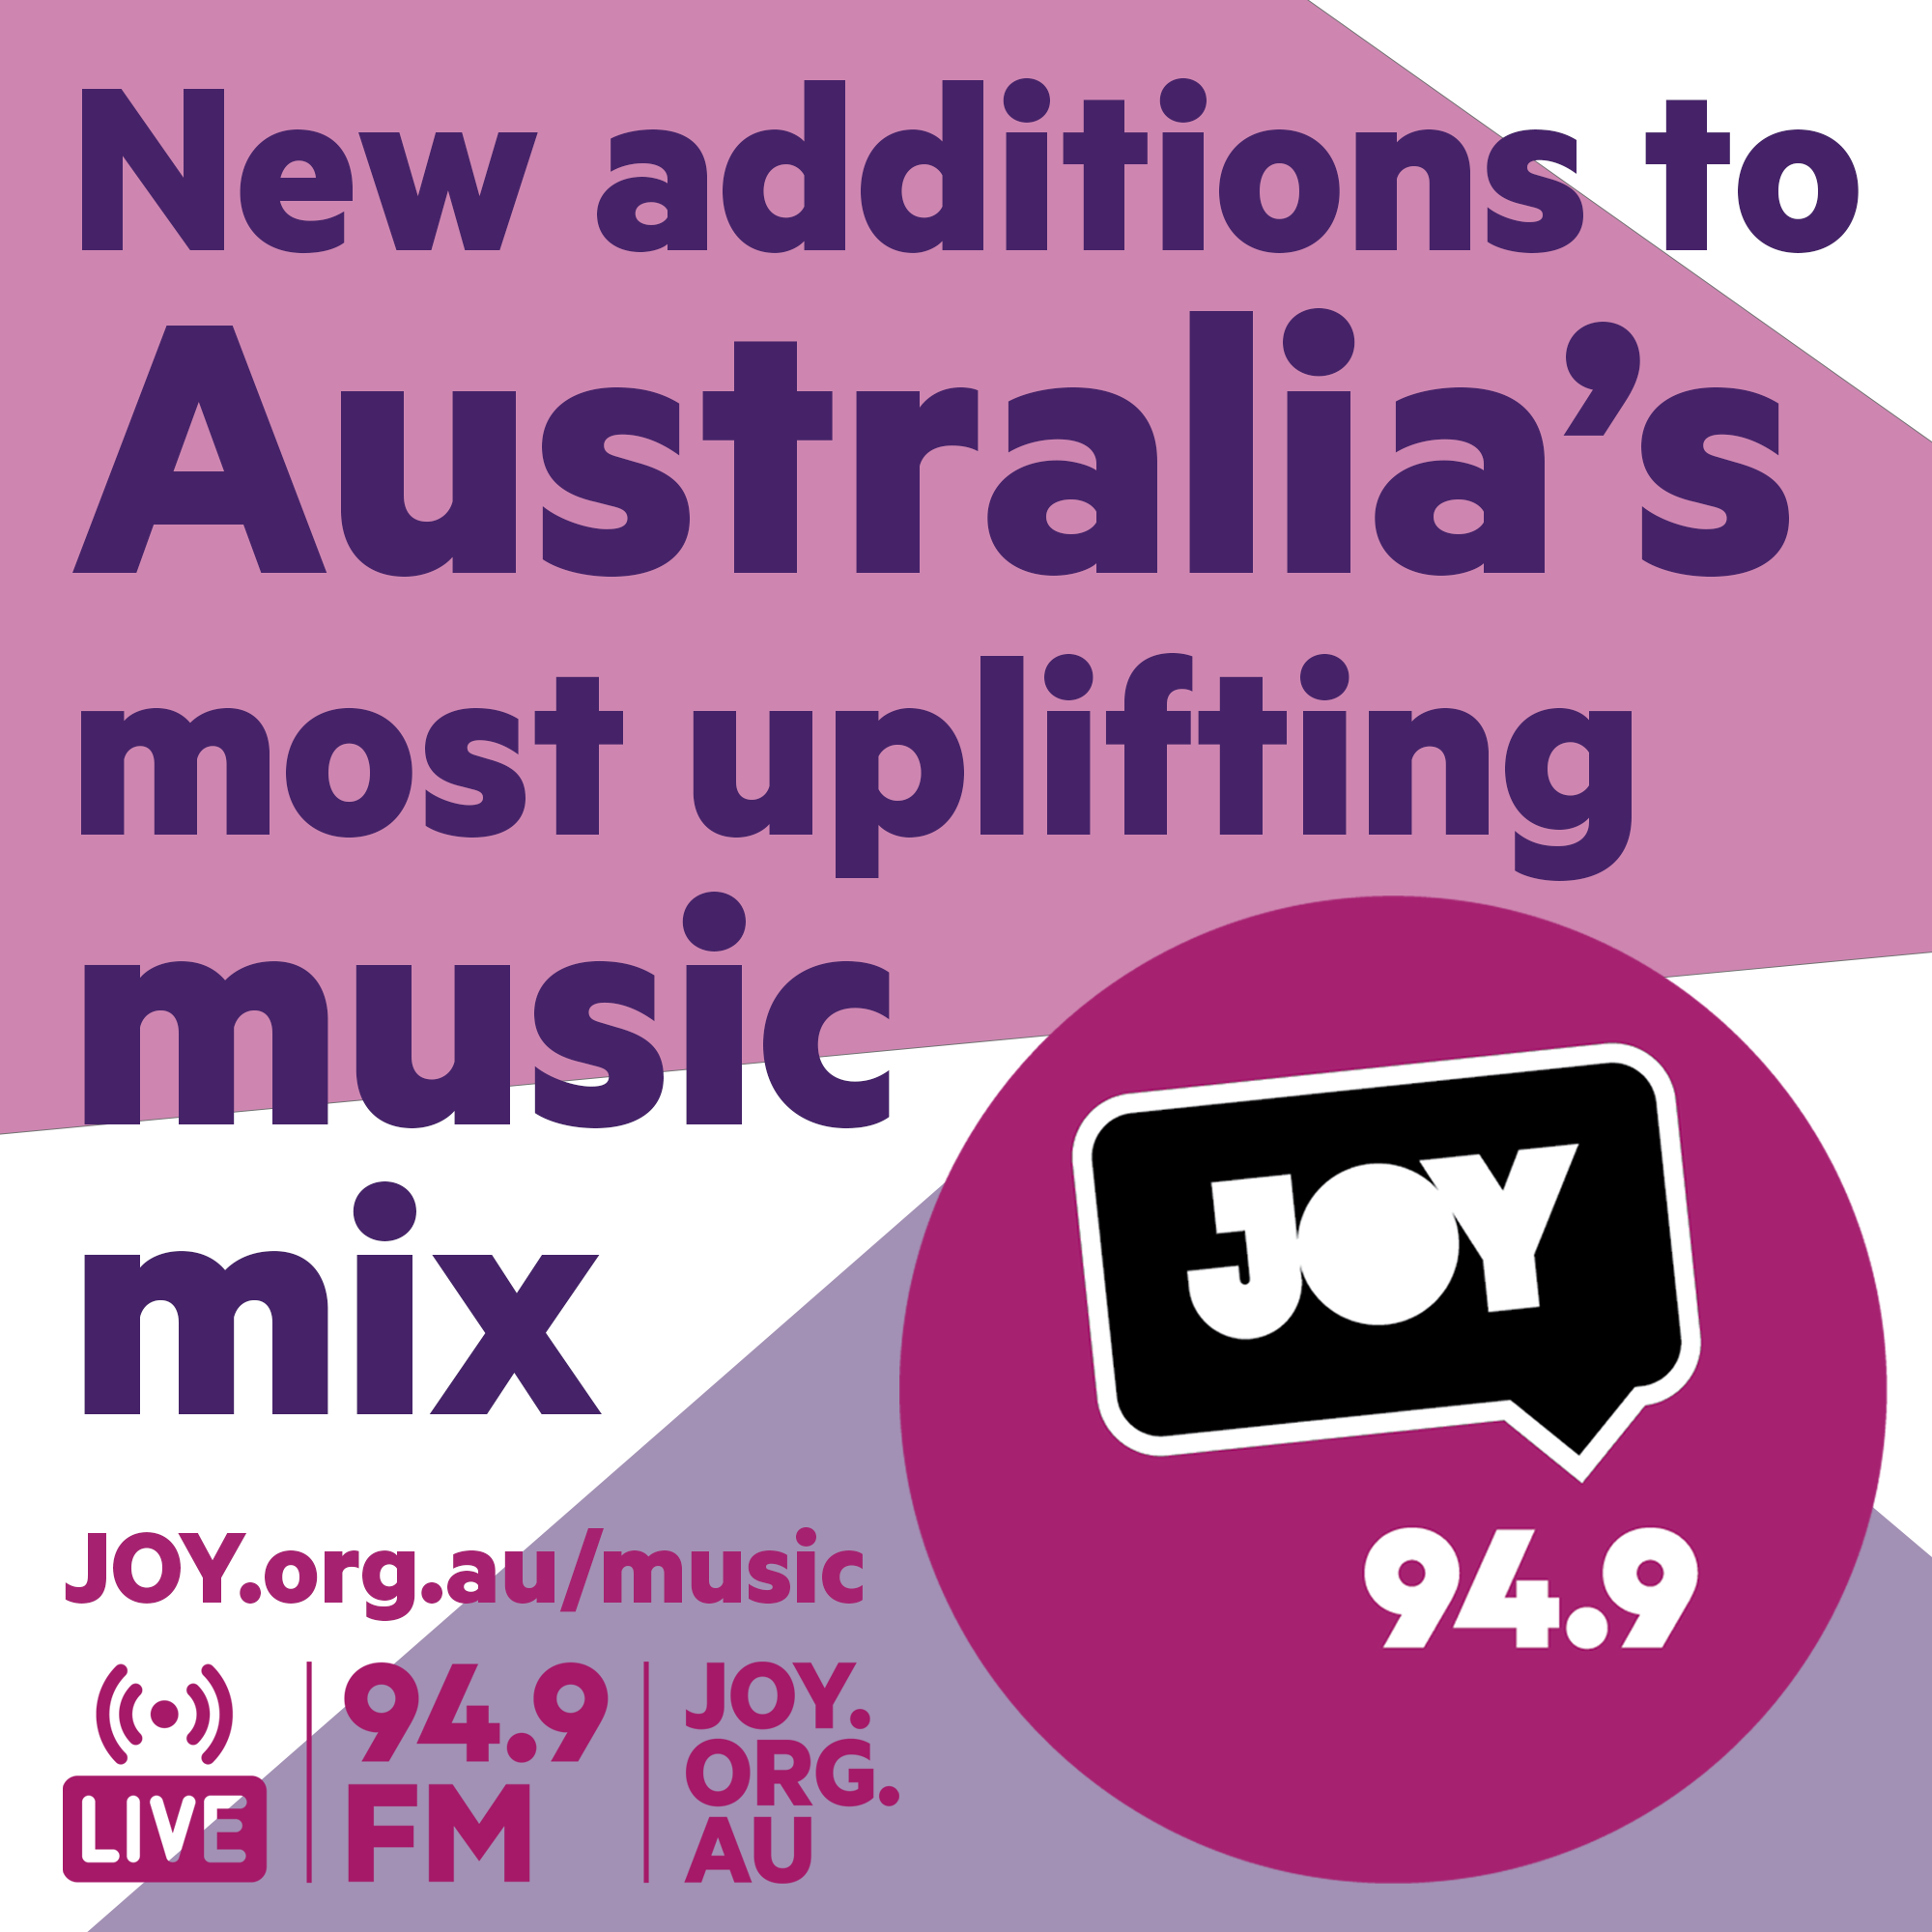 The newest songs to Australia’s most uplifting music mix: 4 May 2022